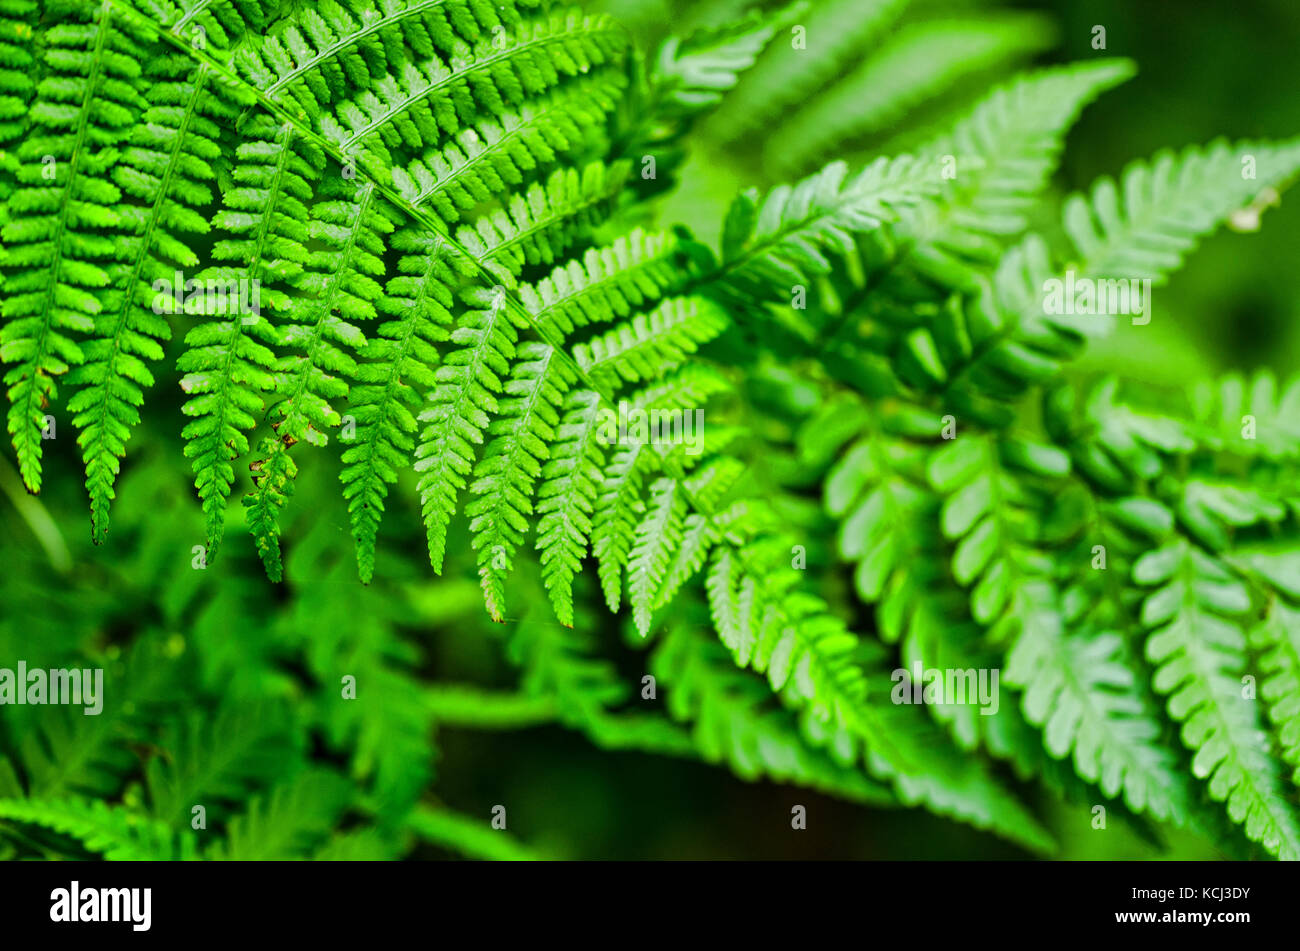 Nephrolepis exaltata (The Sword Fern) - a species of fern in the family Lomariopsidaceae - Felce Stock Photo